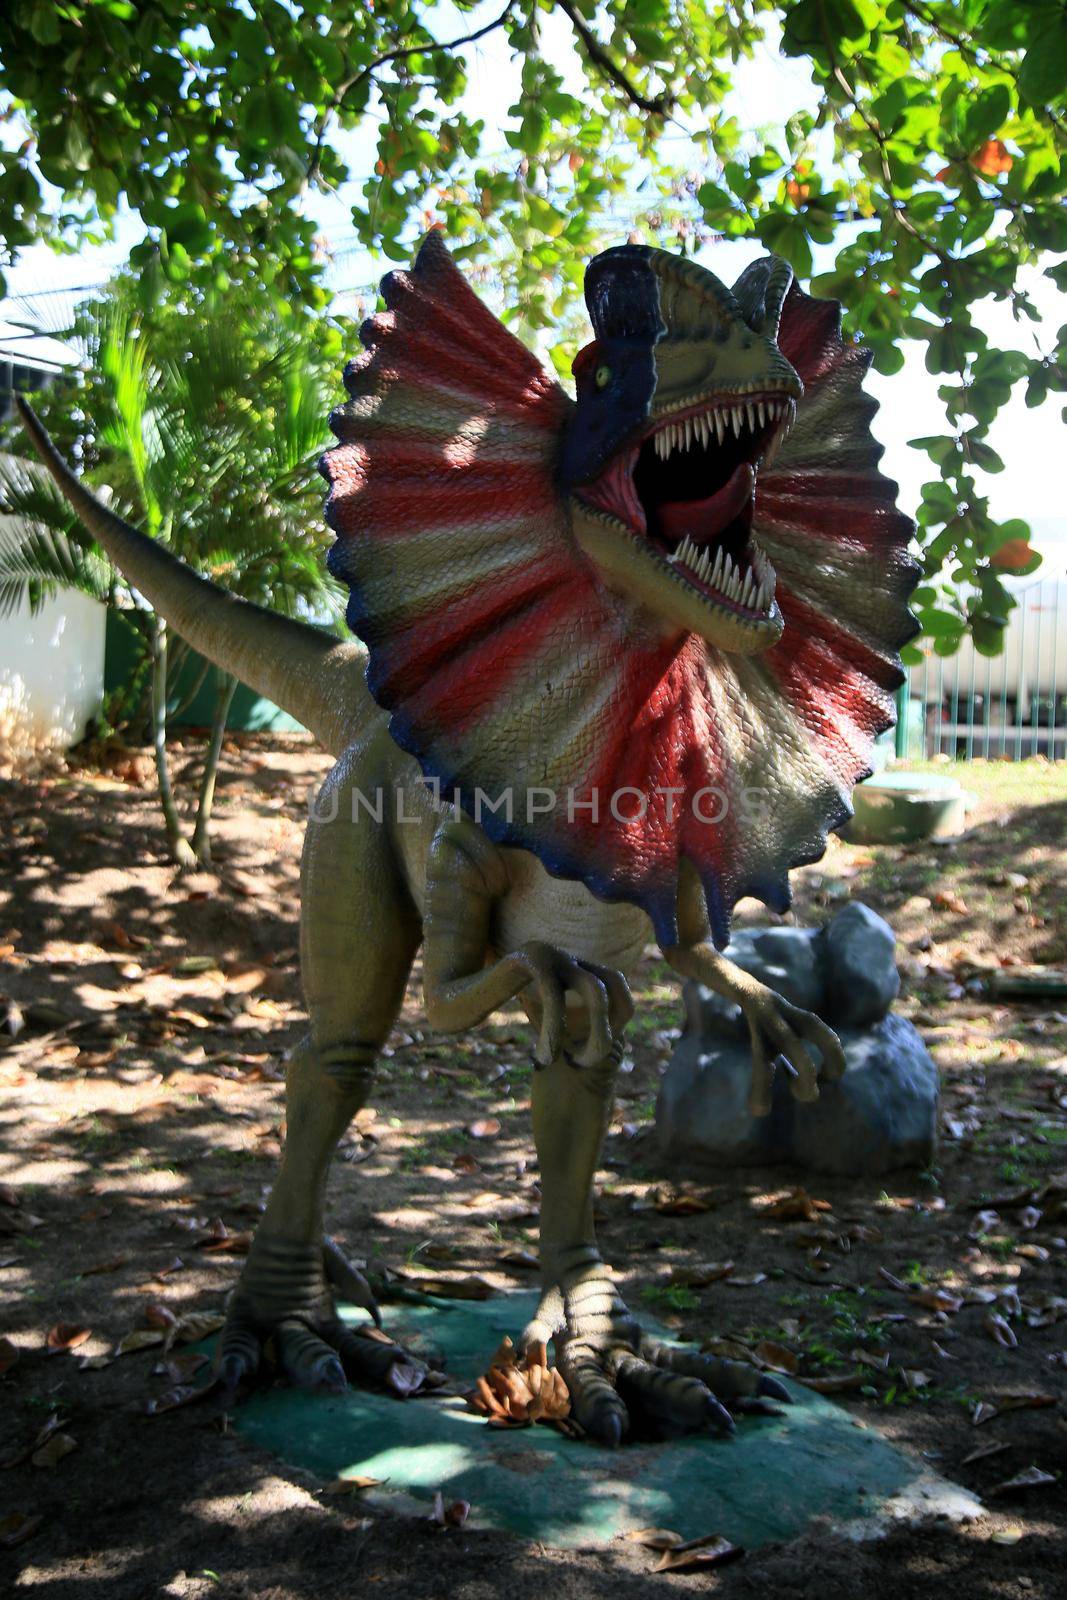 salvador, bahia, brazil - july 20, 2021: view of sculpture in Lagoa dos Dinossauros park in Salvador city. the place was reopened for public visitation.